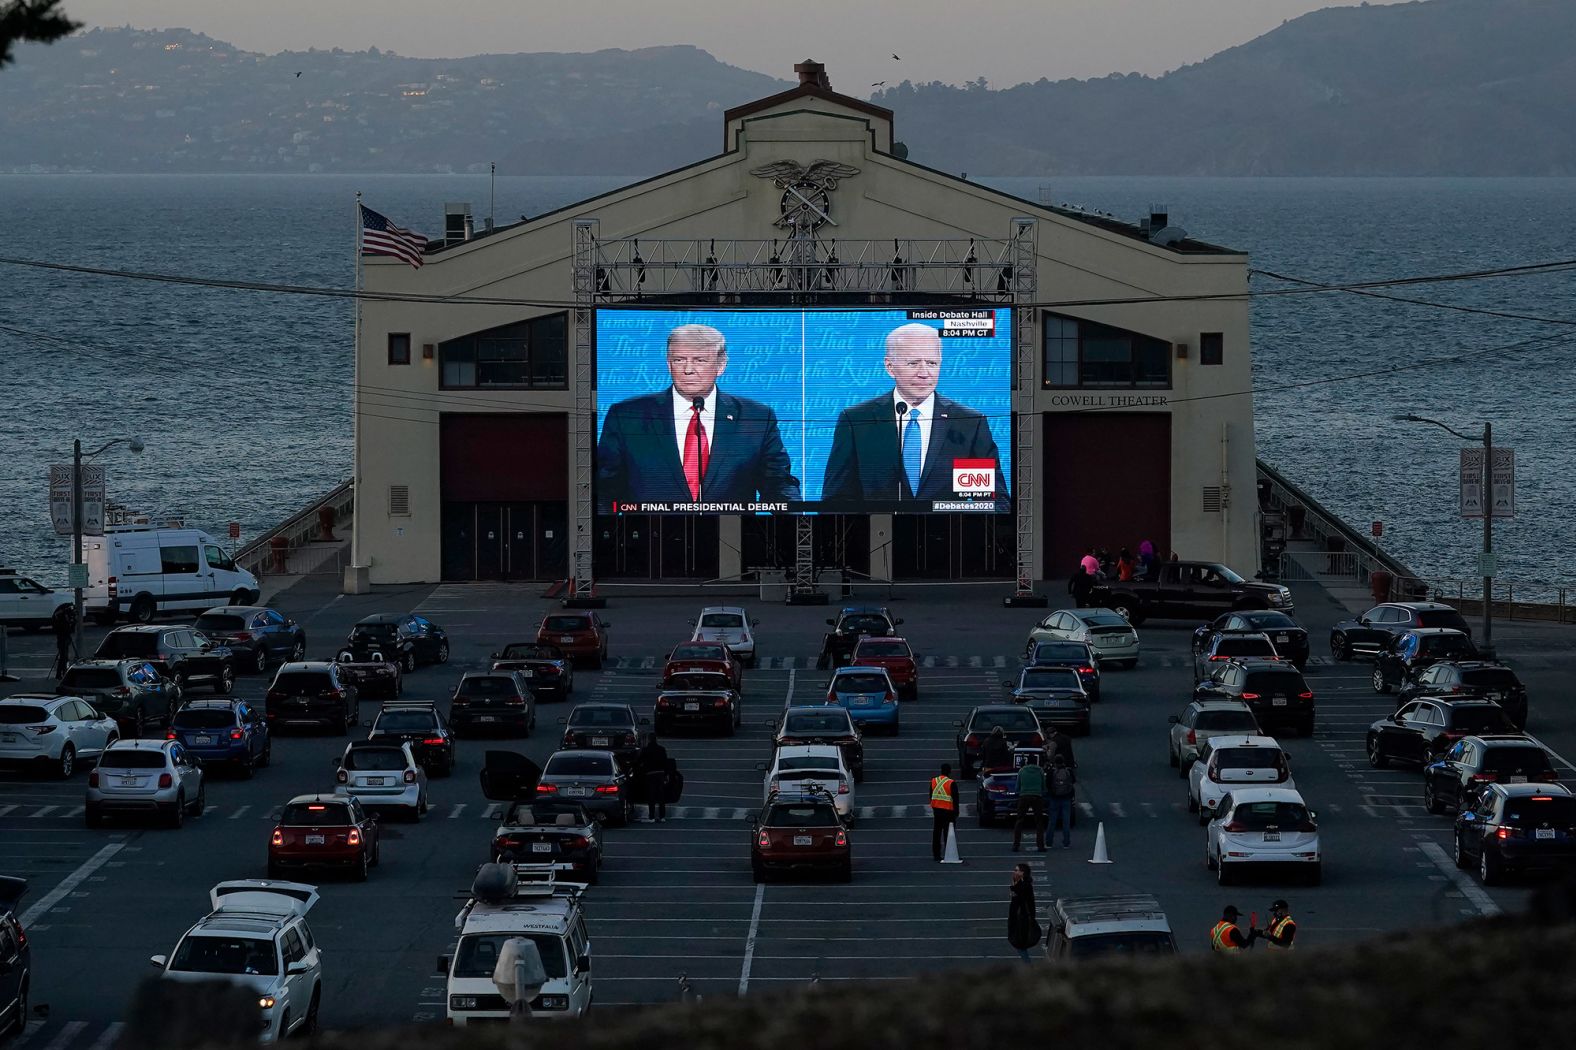 People watch the debate from their vehicles in San Francisco.